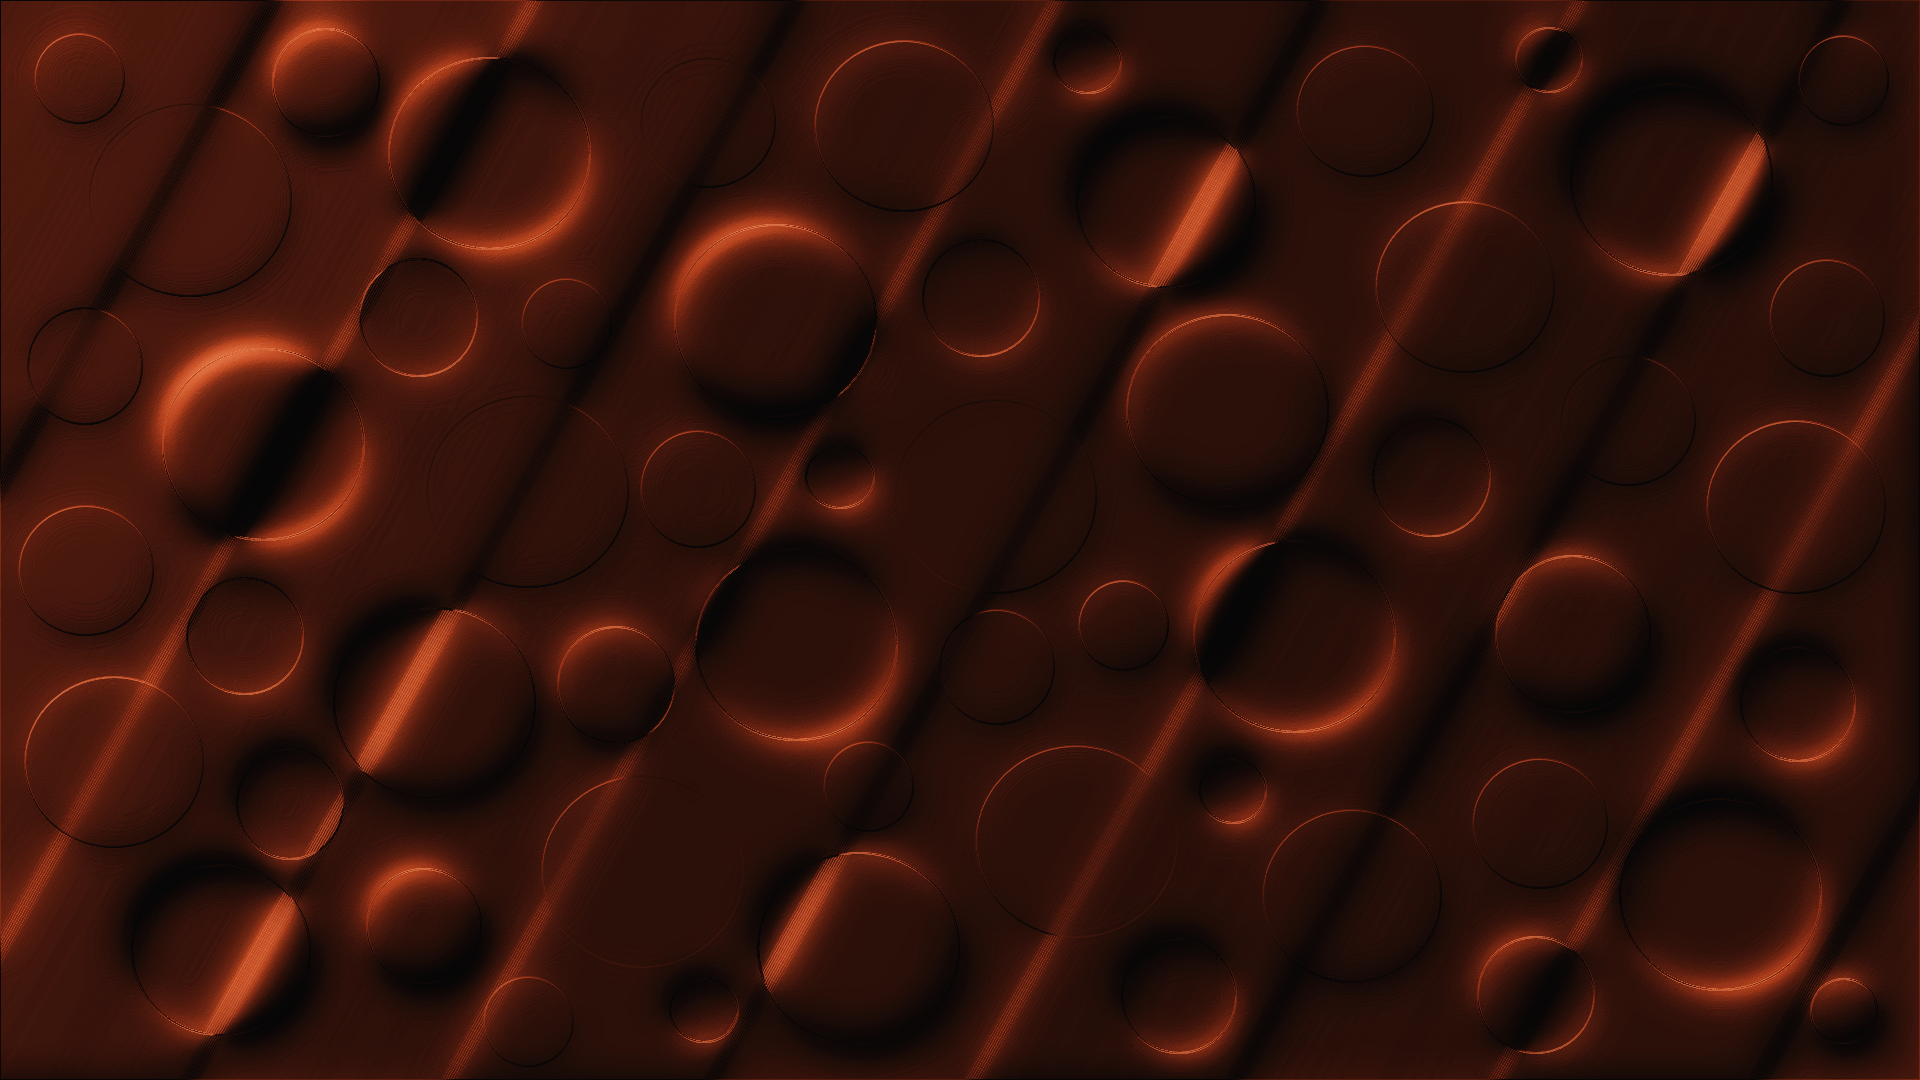 #3 Dark Chocolate Brown 3D Circles by lonewolf6738 HD Wallpaper | Background Image | 1920x1080